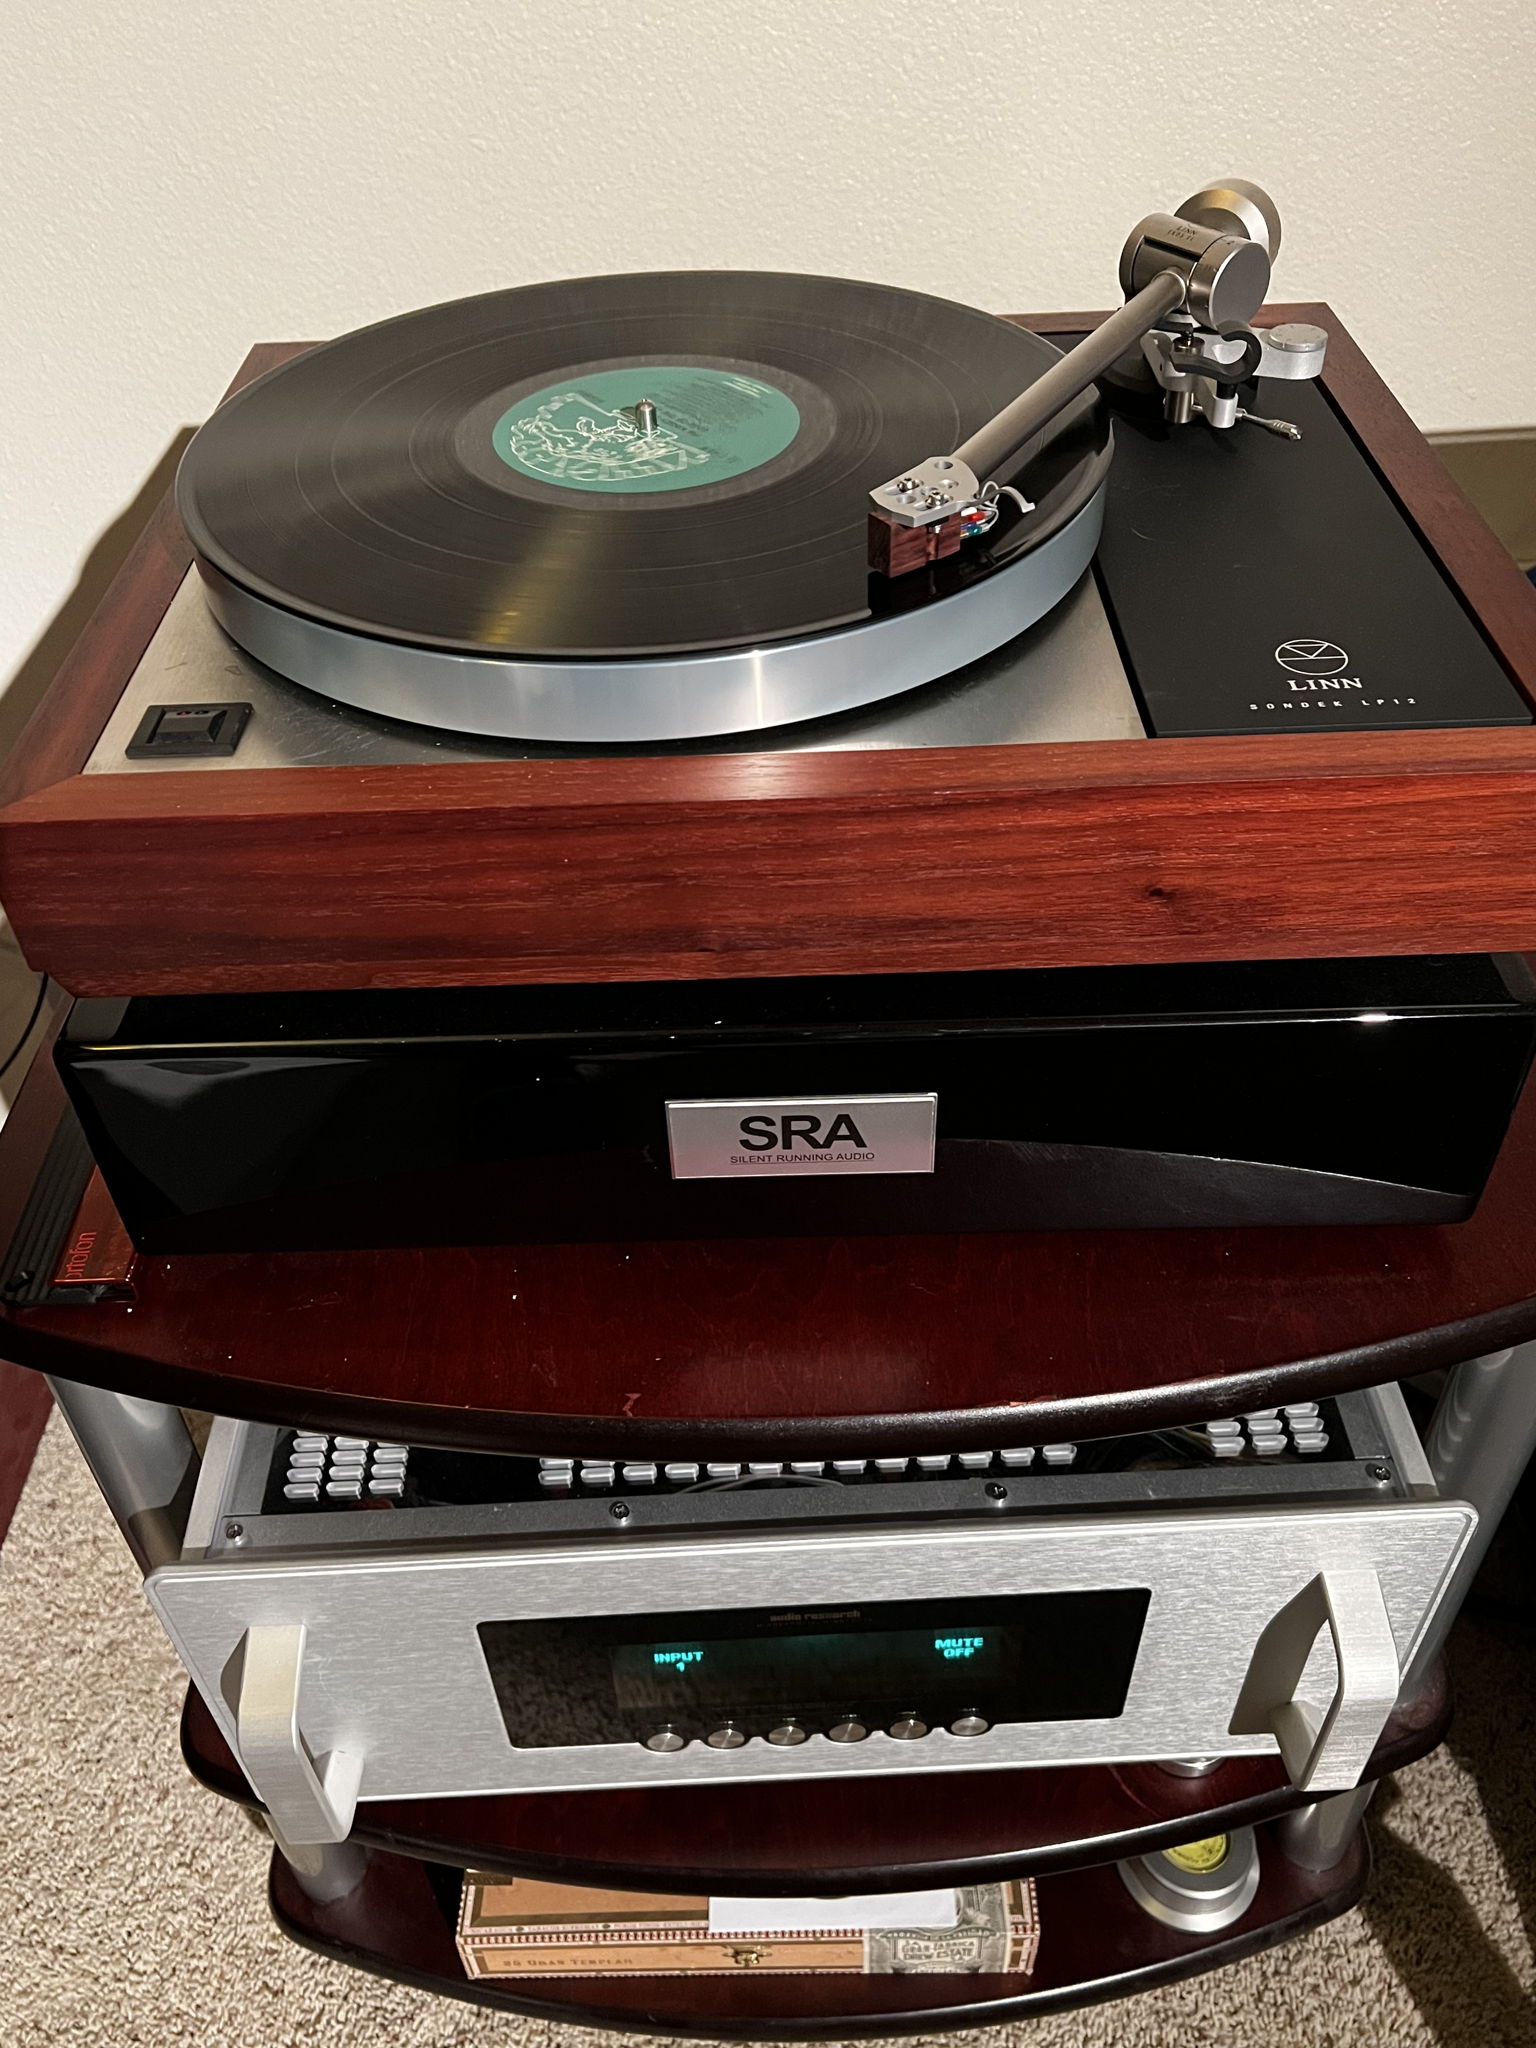 Upgraded Linn LP12 with Ekos SE arm and Keel sub chassis. Yes, it is worth it.